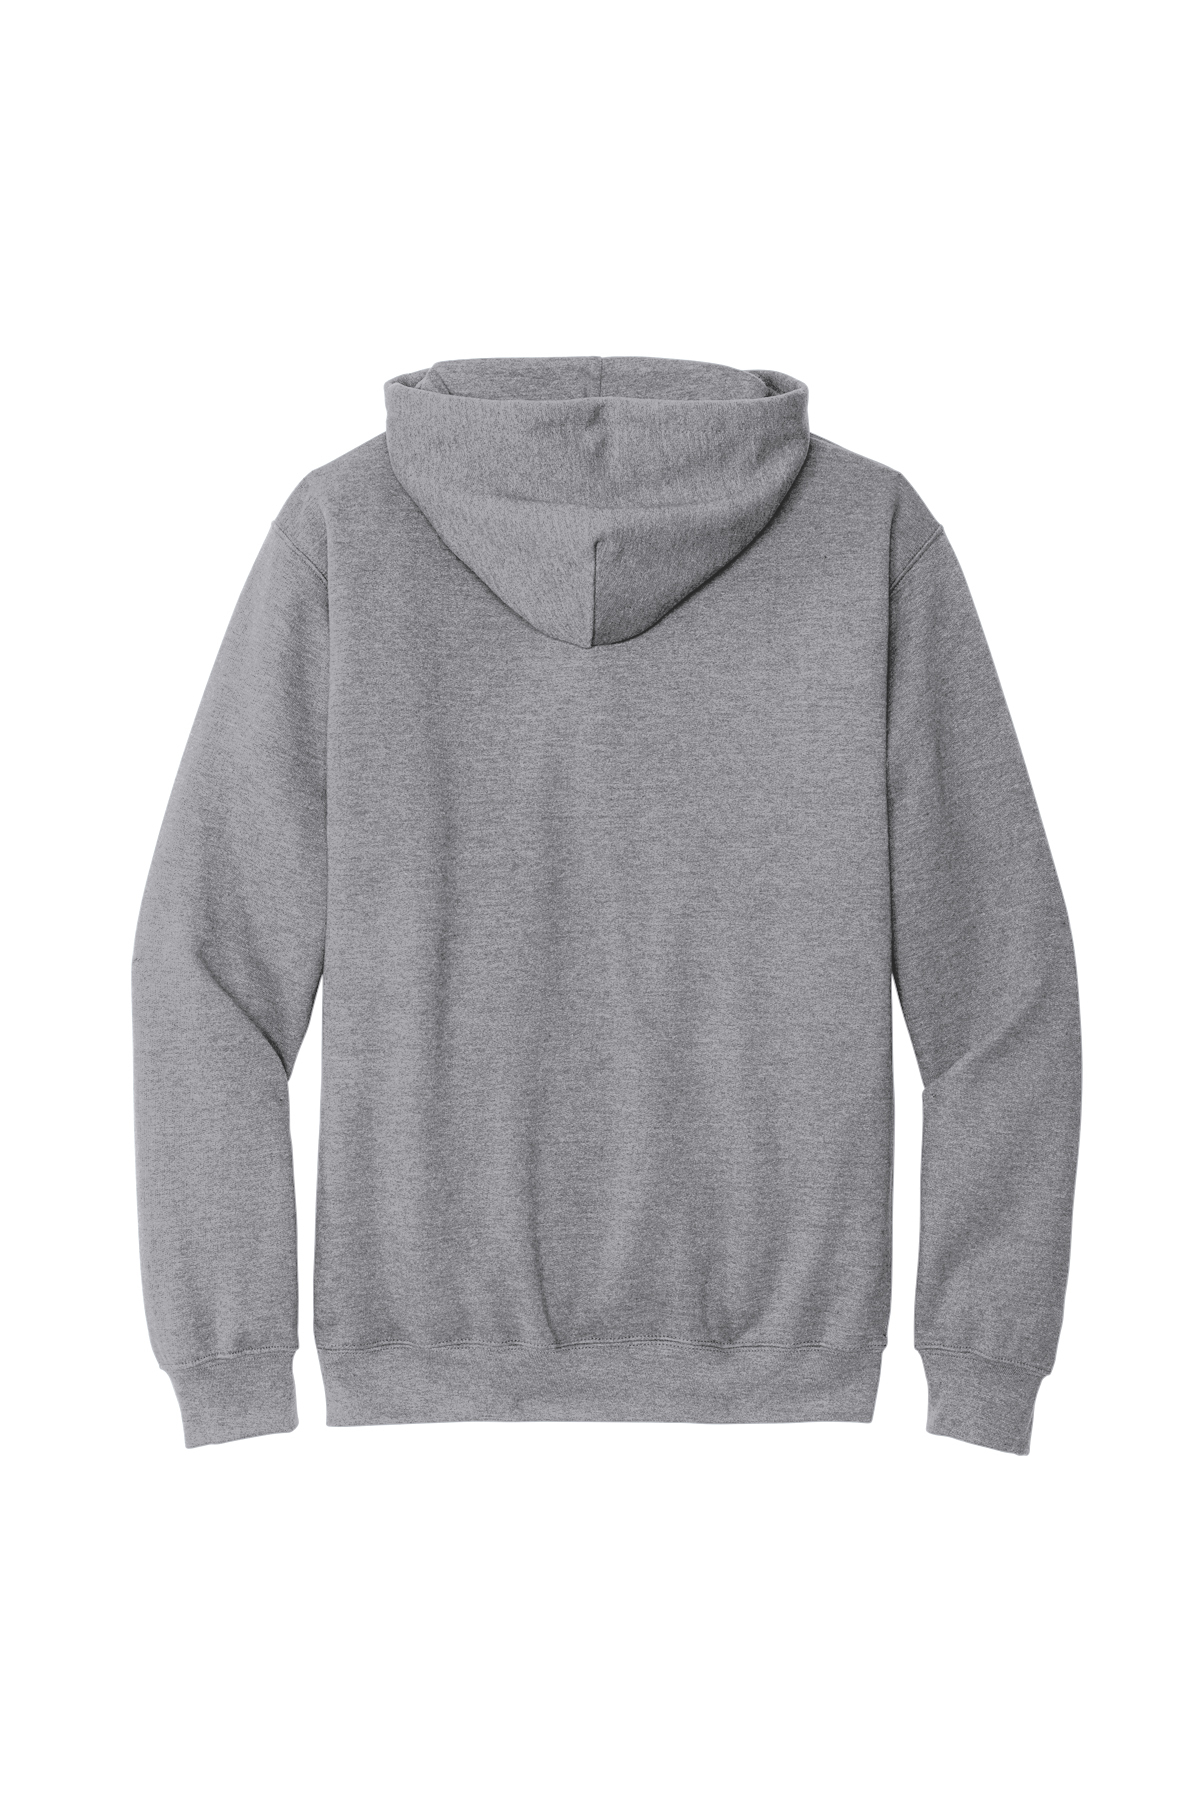 Gildan Softstyle Pullover Hooded Sweatshirt | Product | Company Casuals